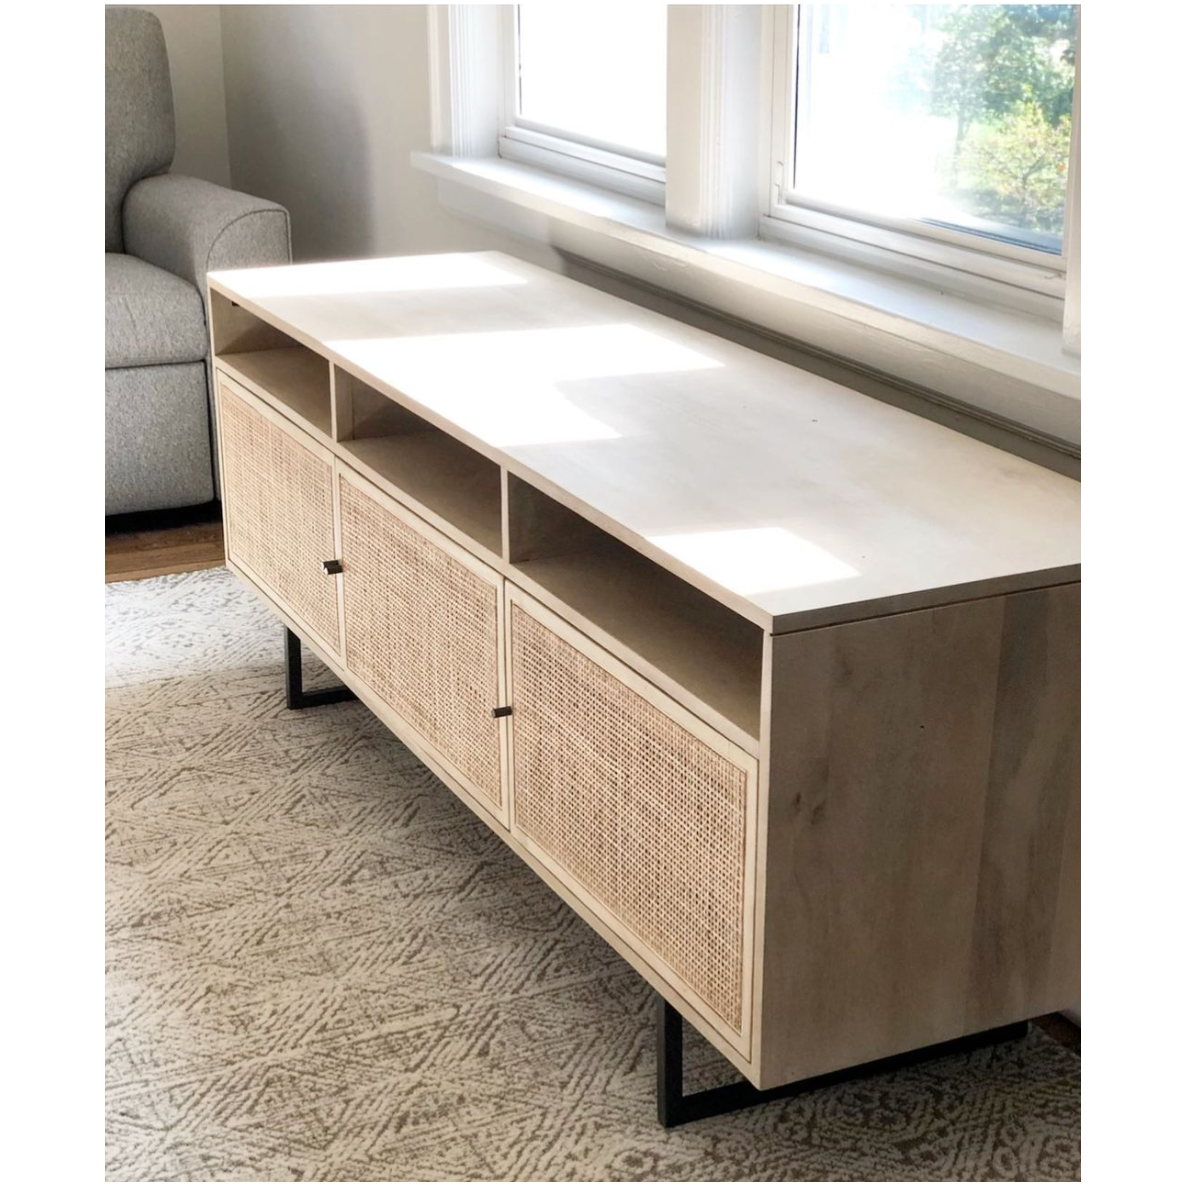 We love the organic feel of this Carmel Natural Mango Media Console. The shelves and posterior cord management make this the perfect media console for families wanting extra storage, while also adding a mid-century look to the room.   Size: 65"w x 18"d x 24"h  Materials: Mango Wood, Cane, Iron